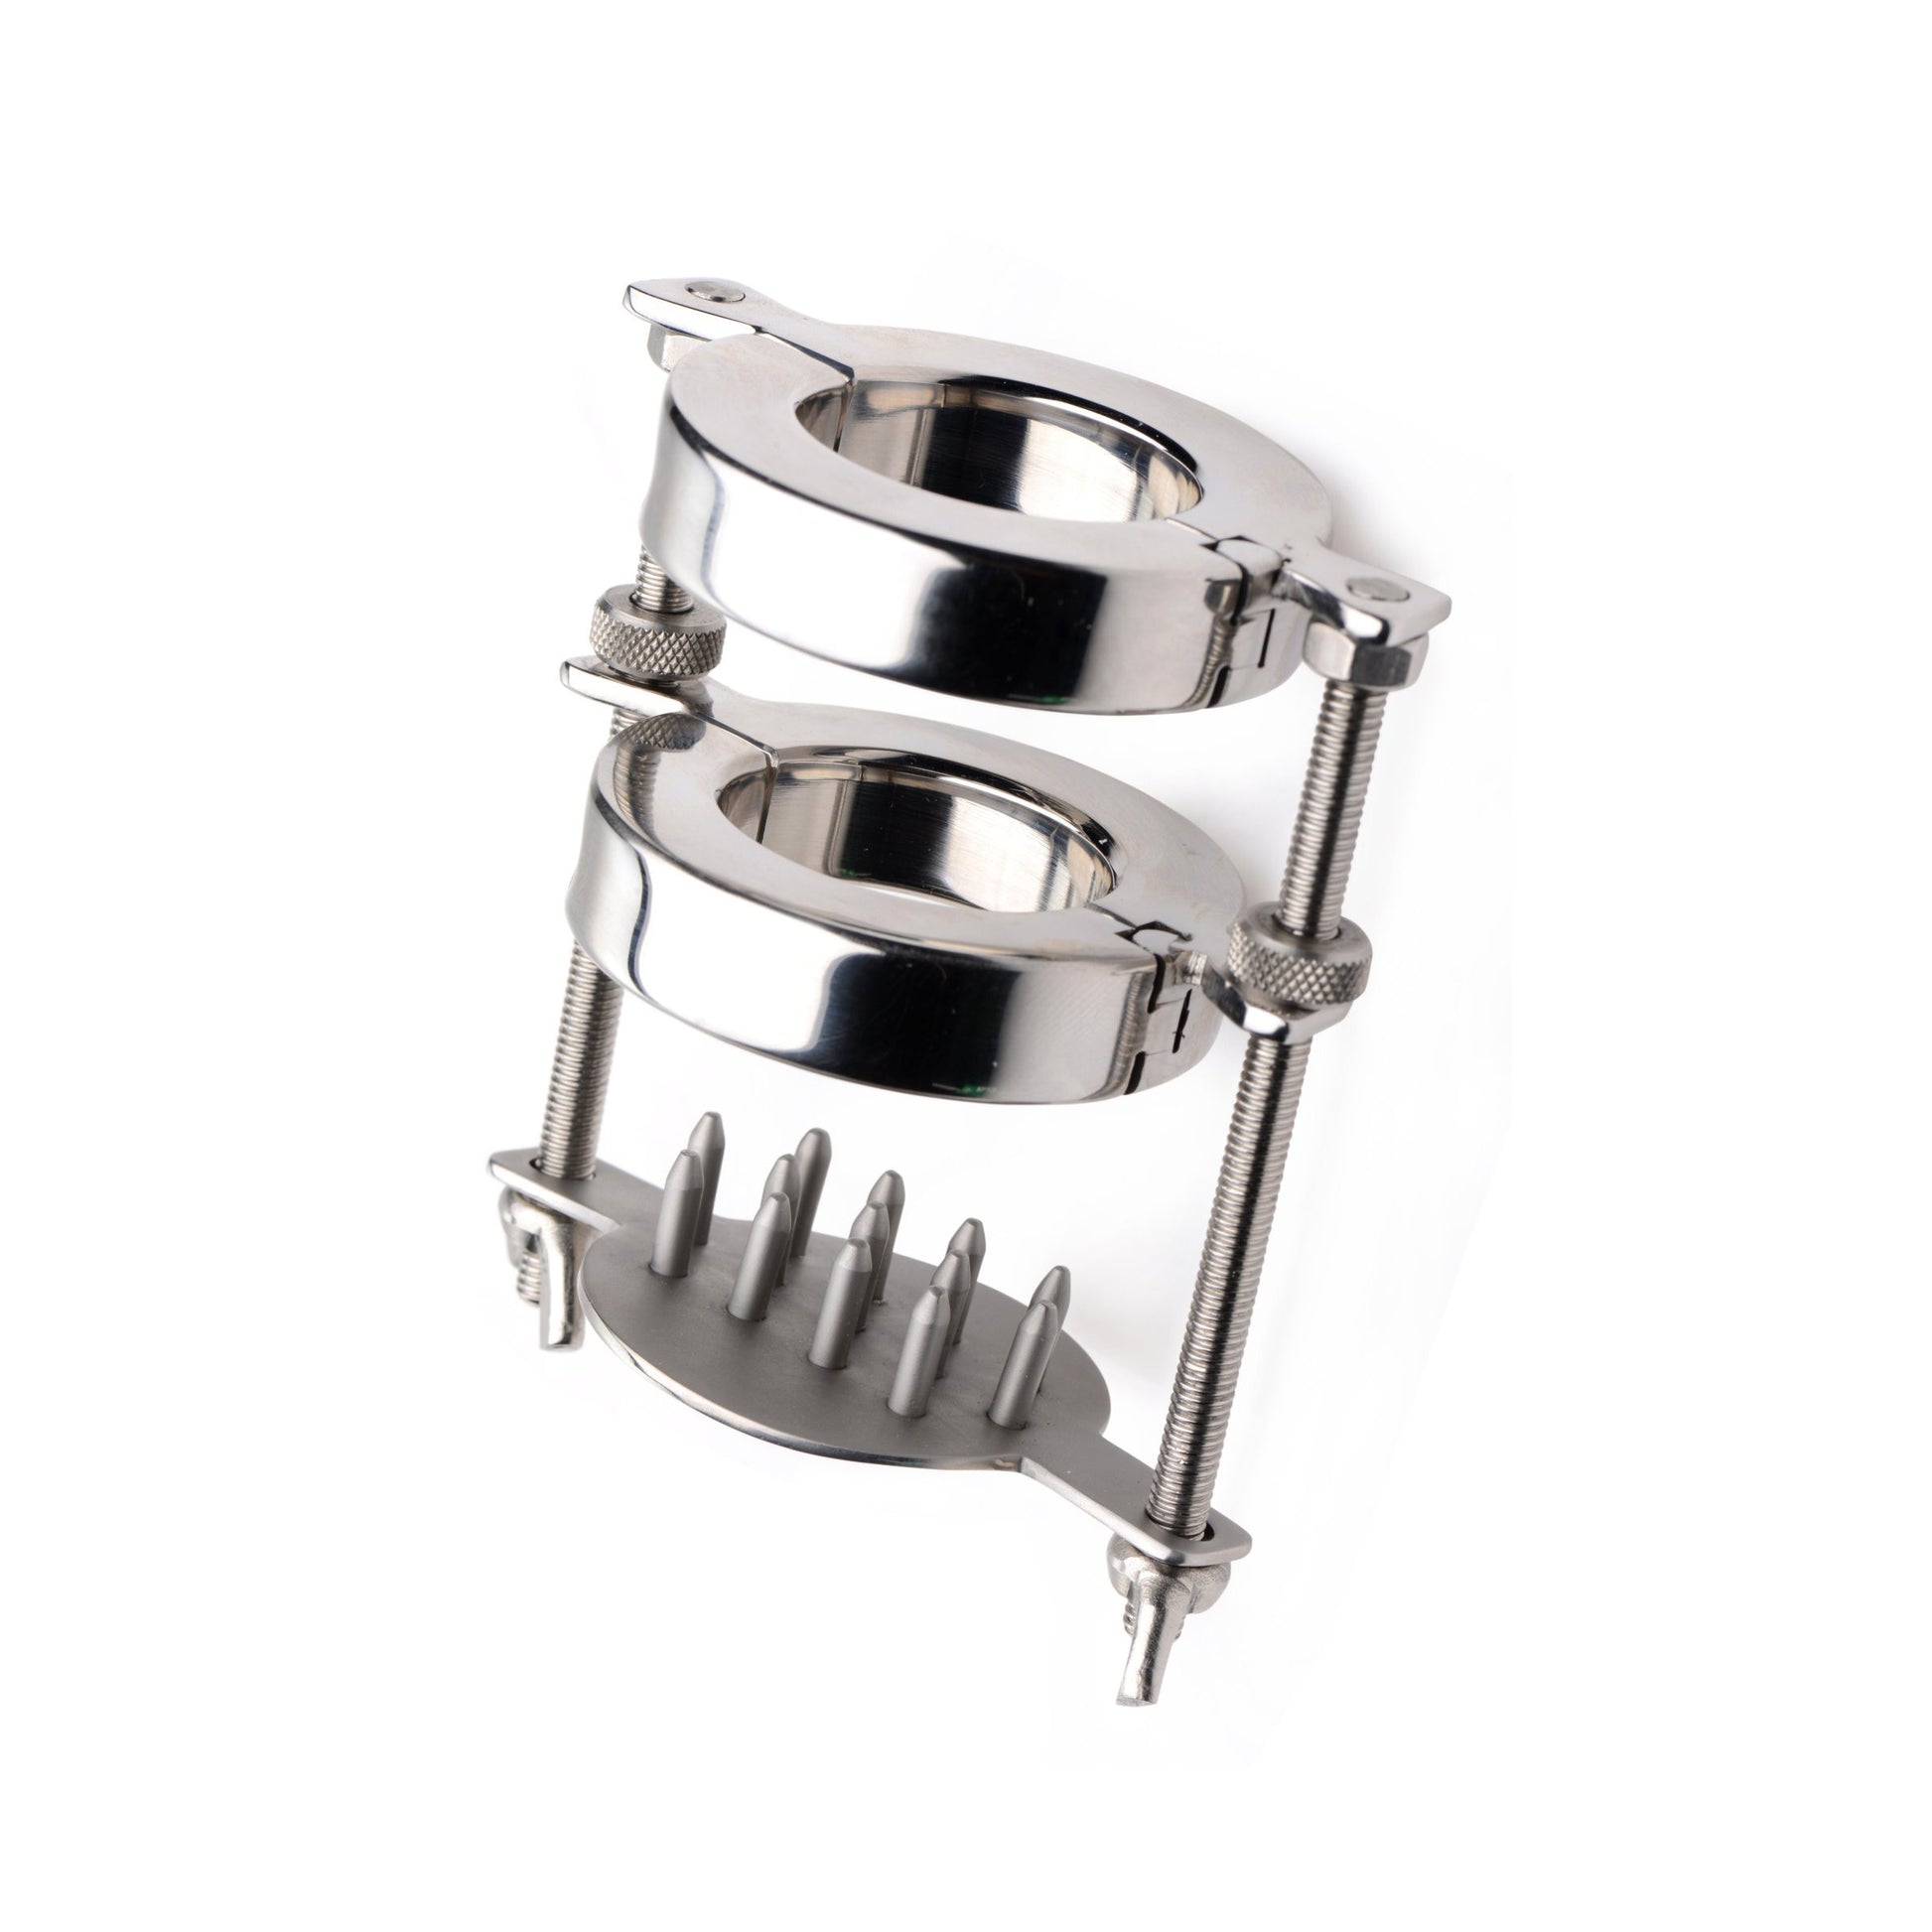 Stainless Steel Spiked CBT Ball Stretcher and Crusher - UABDSM